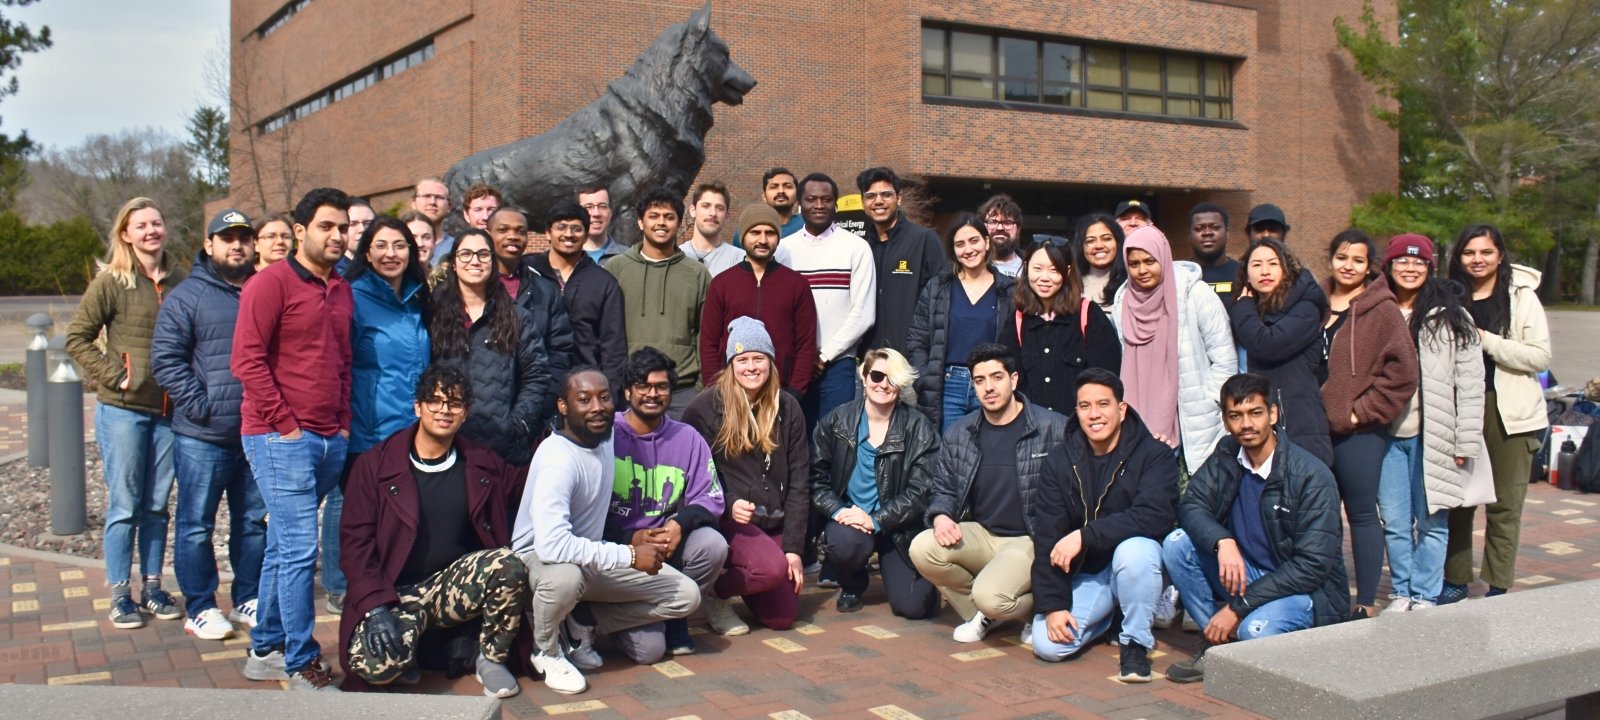 GSG members grouped in front of husky statue outdoors